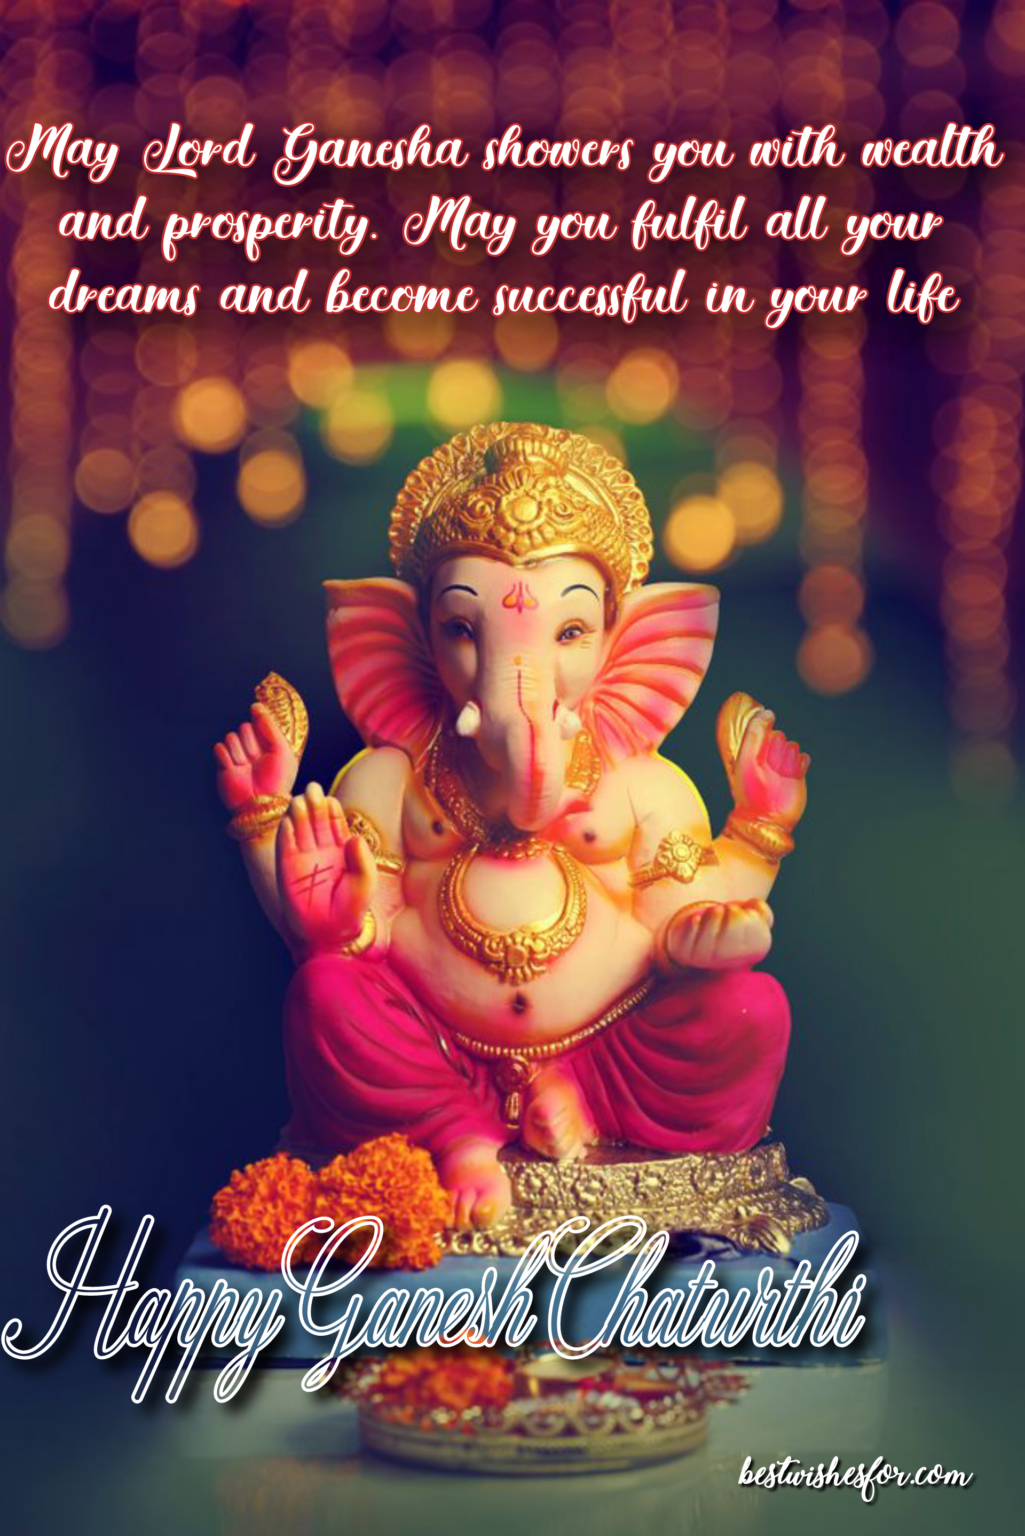 Happy Ganesh Chaturthi 2021 Wishes Quotes Images Messages And Sayings Best Wishes 1576